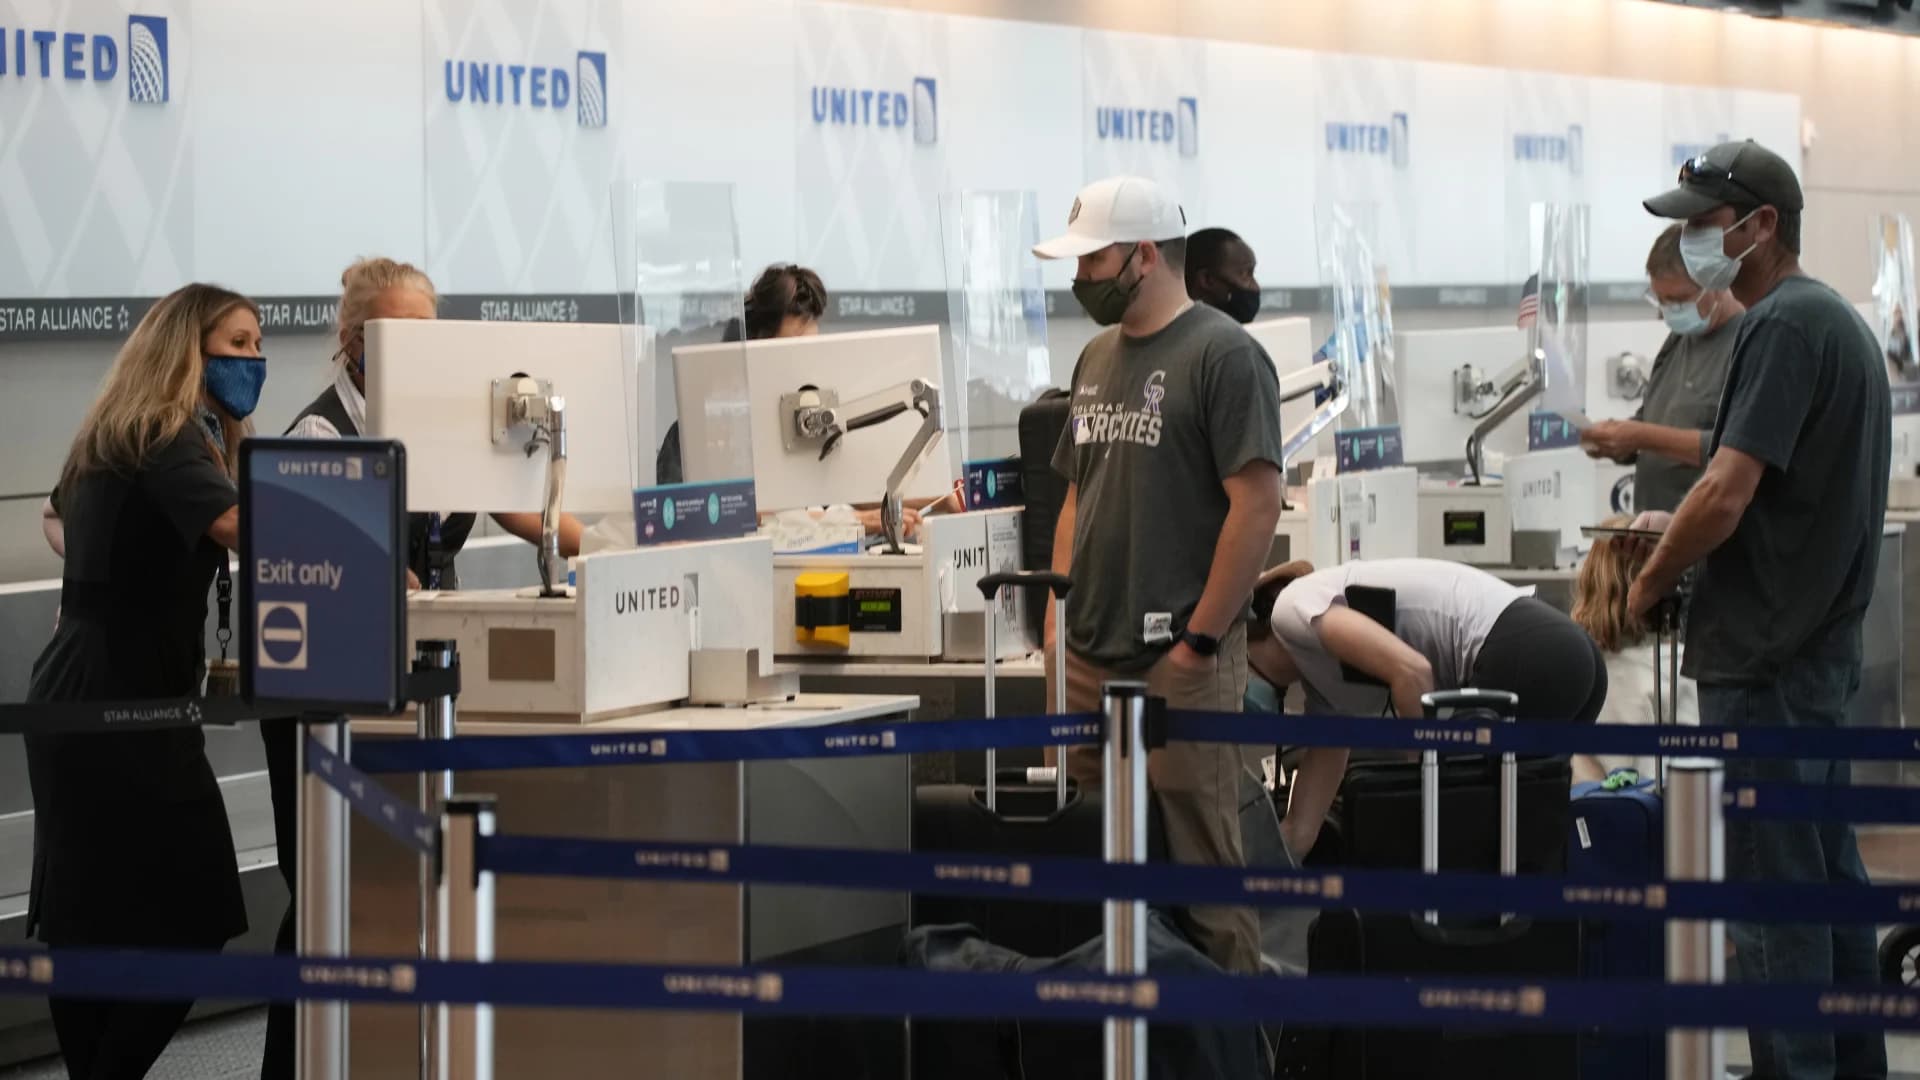 System outage delays United Airlines customers nationwide